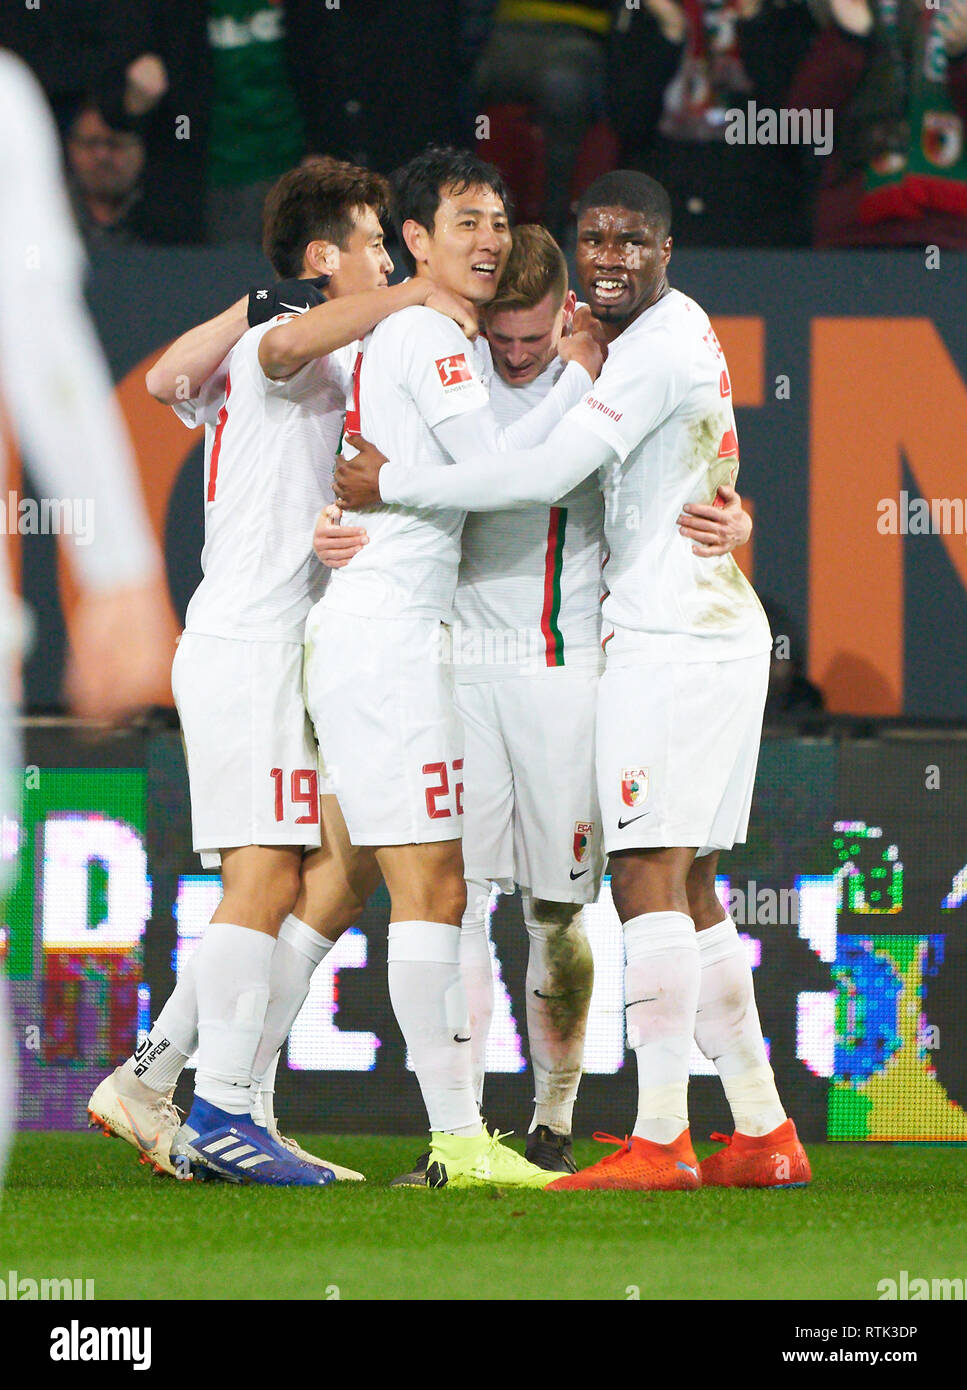 Augsburg, Germany. 01st Mar, 2019. Dong-Won JI, FCA 22 shoot goal for 1-0, celebrates his goal for, happy, laugh, celebration, Kevin DANSO, FCA 38 Andre HAHN, FCA 28 Ja-Cheol KOO, FCA 19 FC AUGSBURG - BORUSSIA DORTMUND 2-1 - DFL REGULATIONS PROHIBIT ANY USE OF PHOTOGRAPHS as IMAGE SEQUENCES and/or QUASI-VIDEO - 1.German Soccer League, Augsburg, March 1, 2019 Season 2018/2019, matchday 24, BVB, Bavaria Credit: Peter Schatz/Alamy Live News Stock Photo